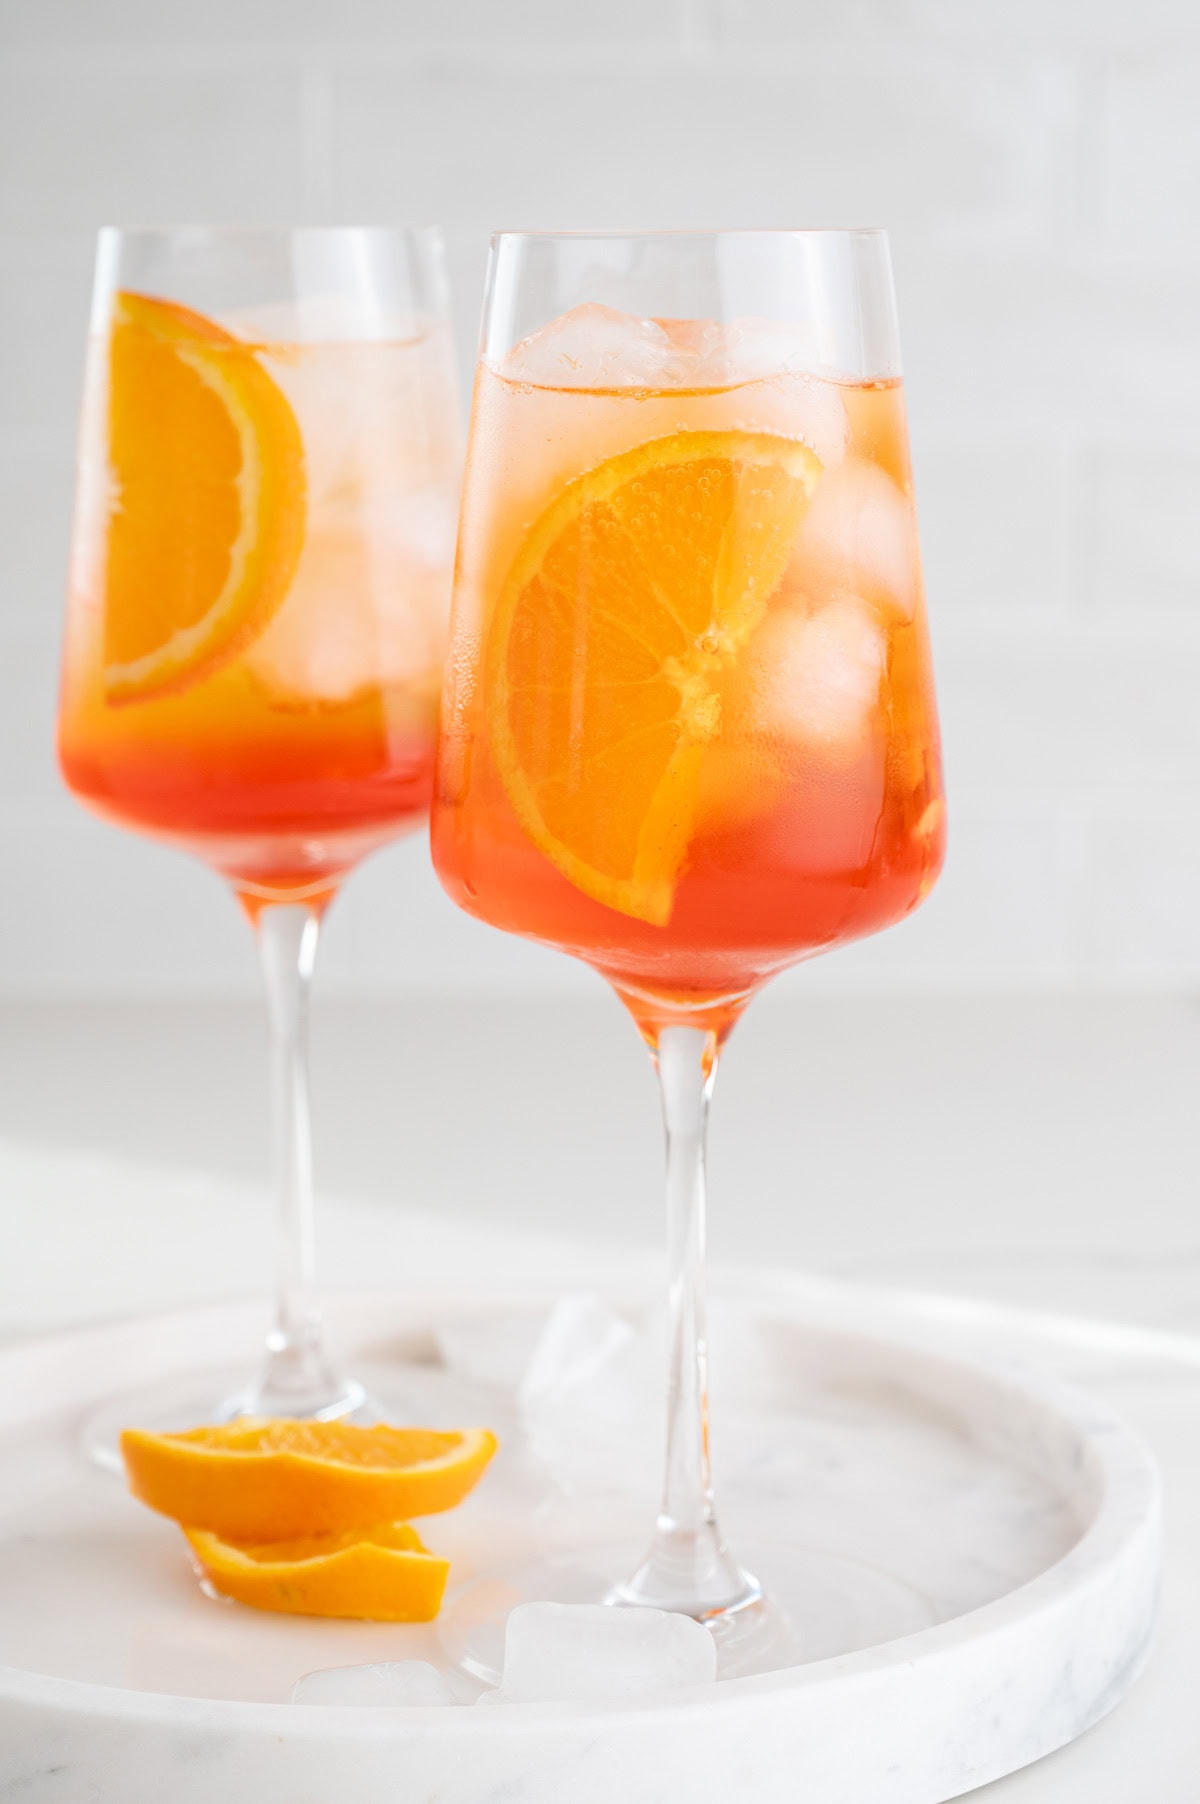 Two glasses with Aperol Spritz cocktail garnished with orange slices on a white marble board.